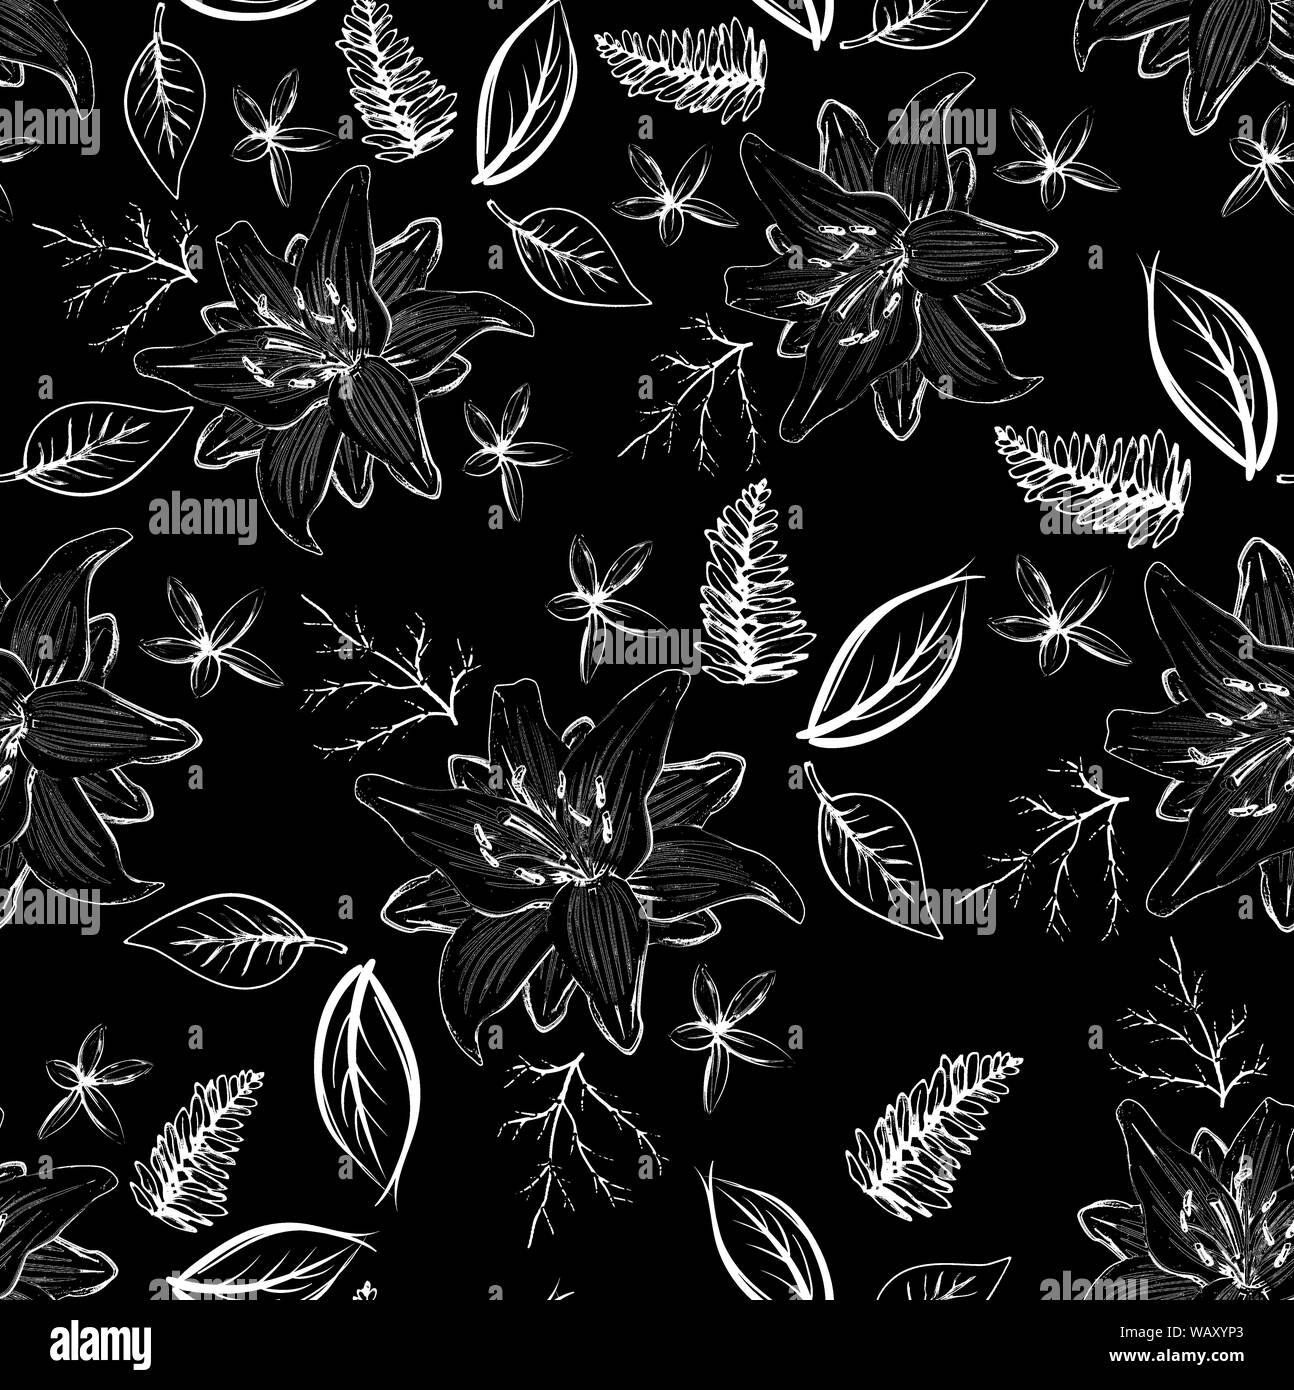 Flowers with leaves design seamless pattern Stock Photo